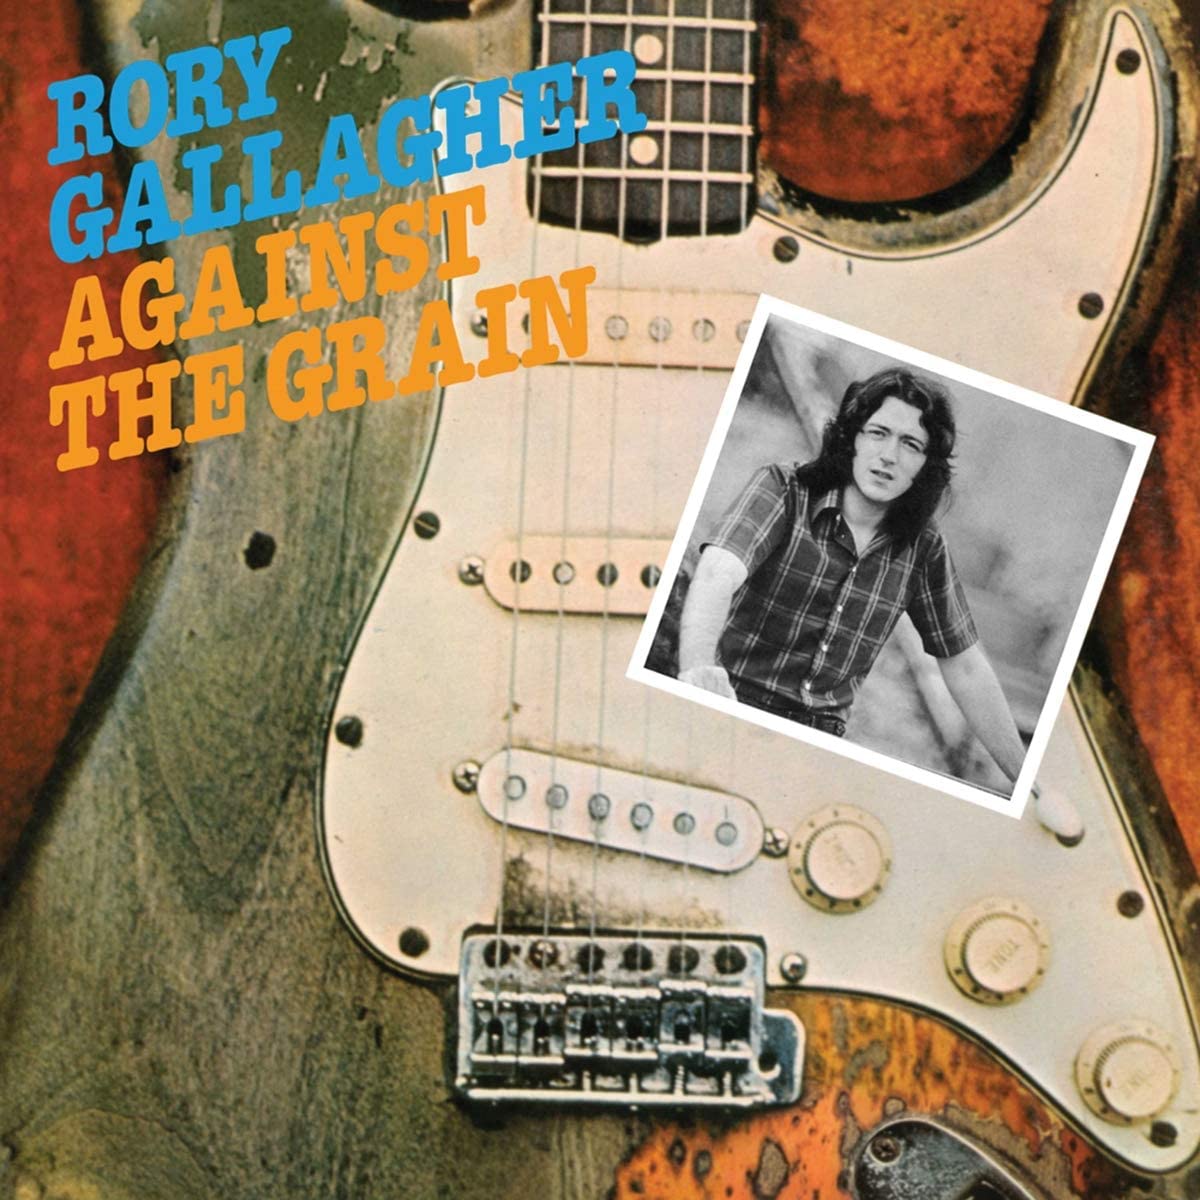 7th studio album on Vinyl by Rory Gallagher. Released in 1975, the album mostly comprises new songs written by Gallagher along with some classic blues and R&B numbers.